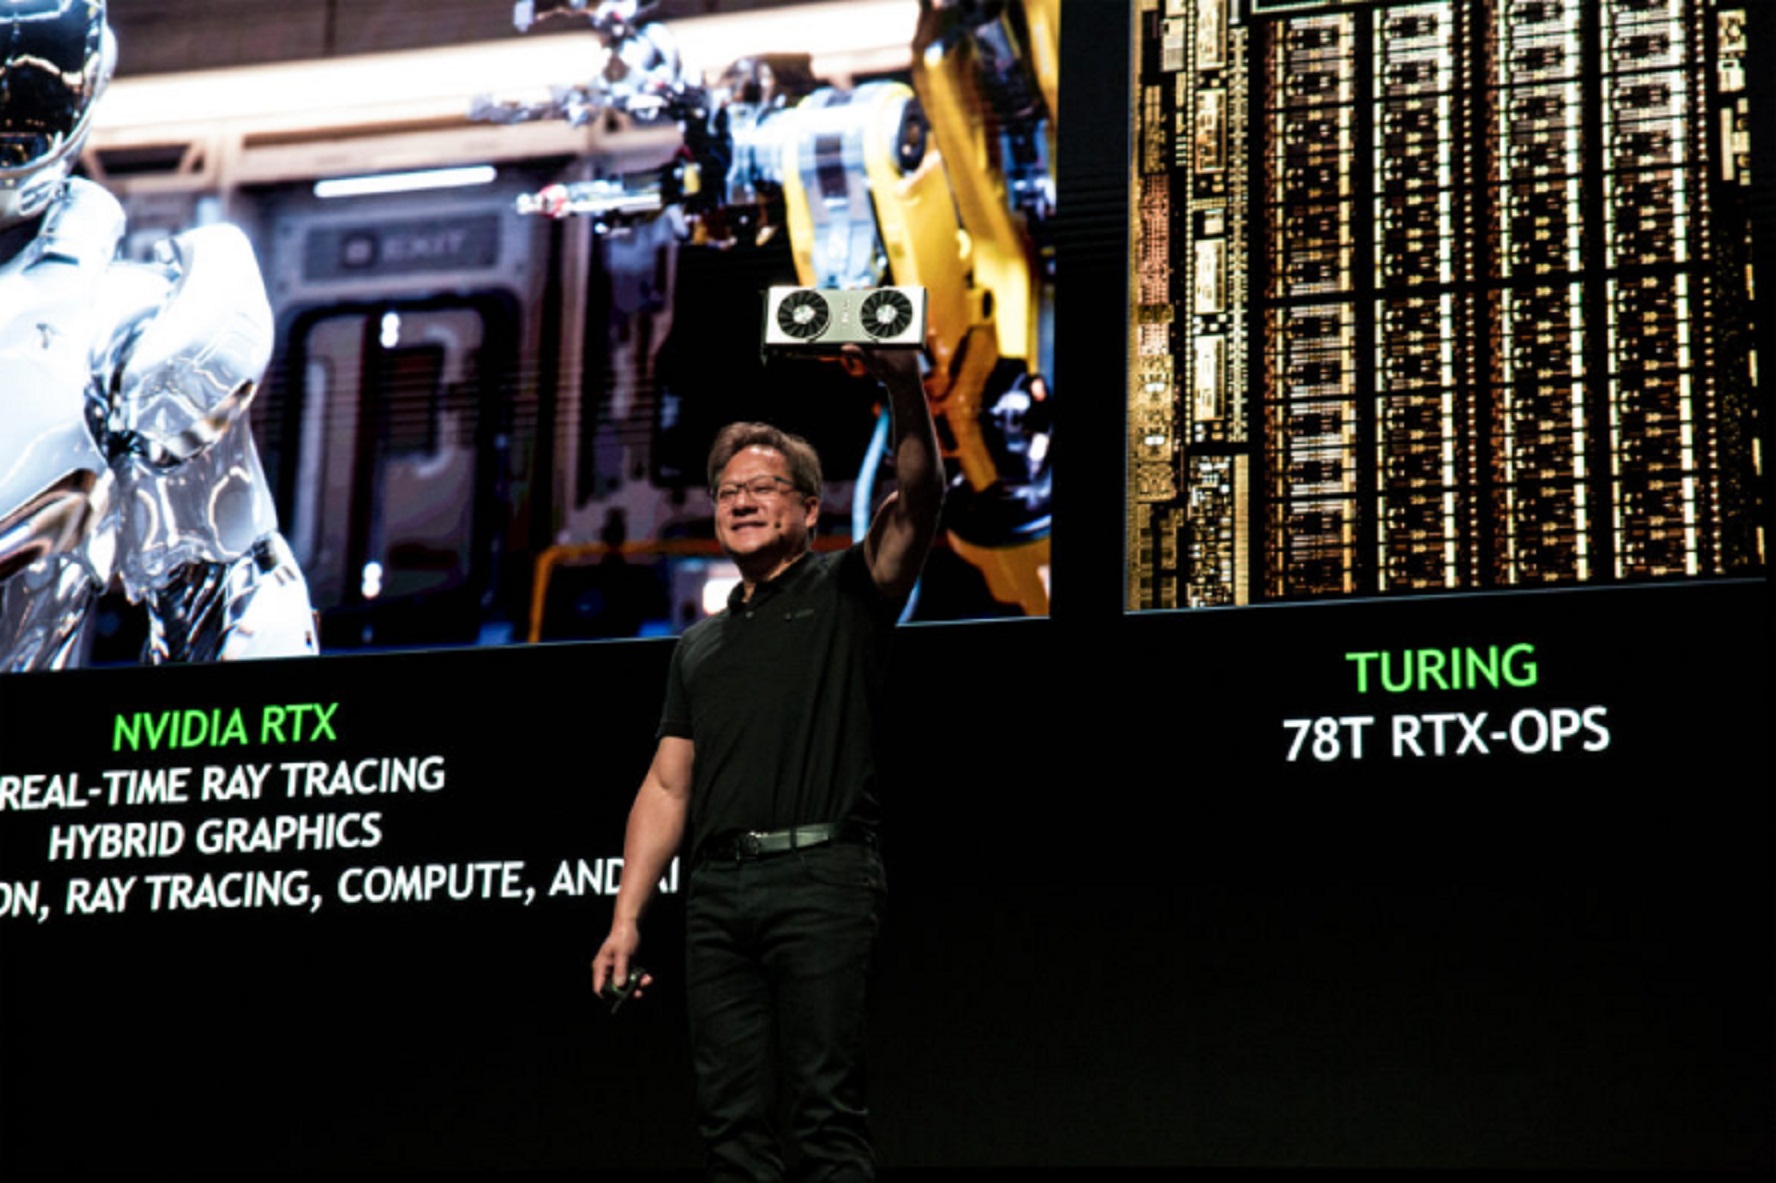 Nvidia Under Fire For Banning Review Site That Doesn’t Focus On Nvidia Hardware Strengths